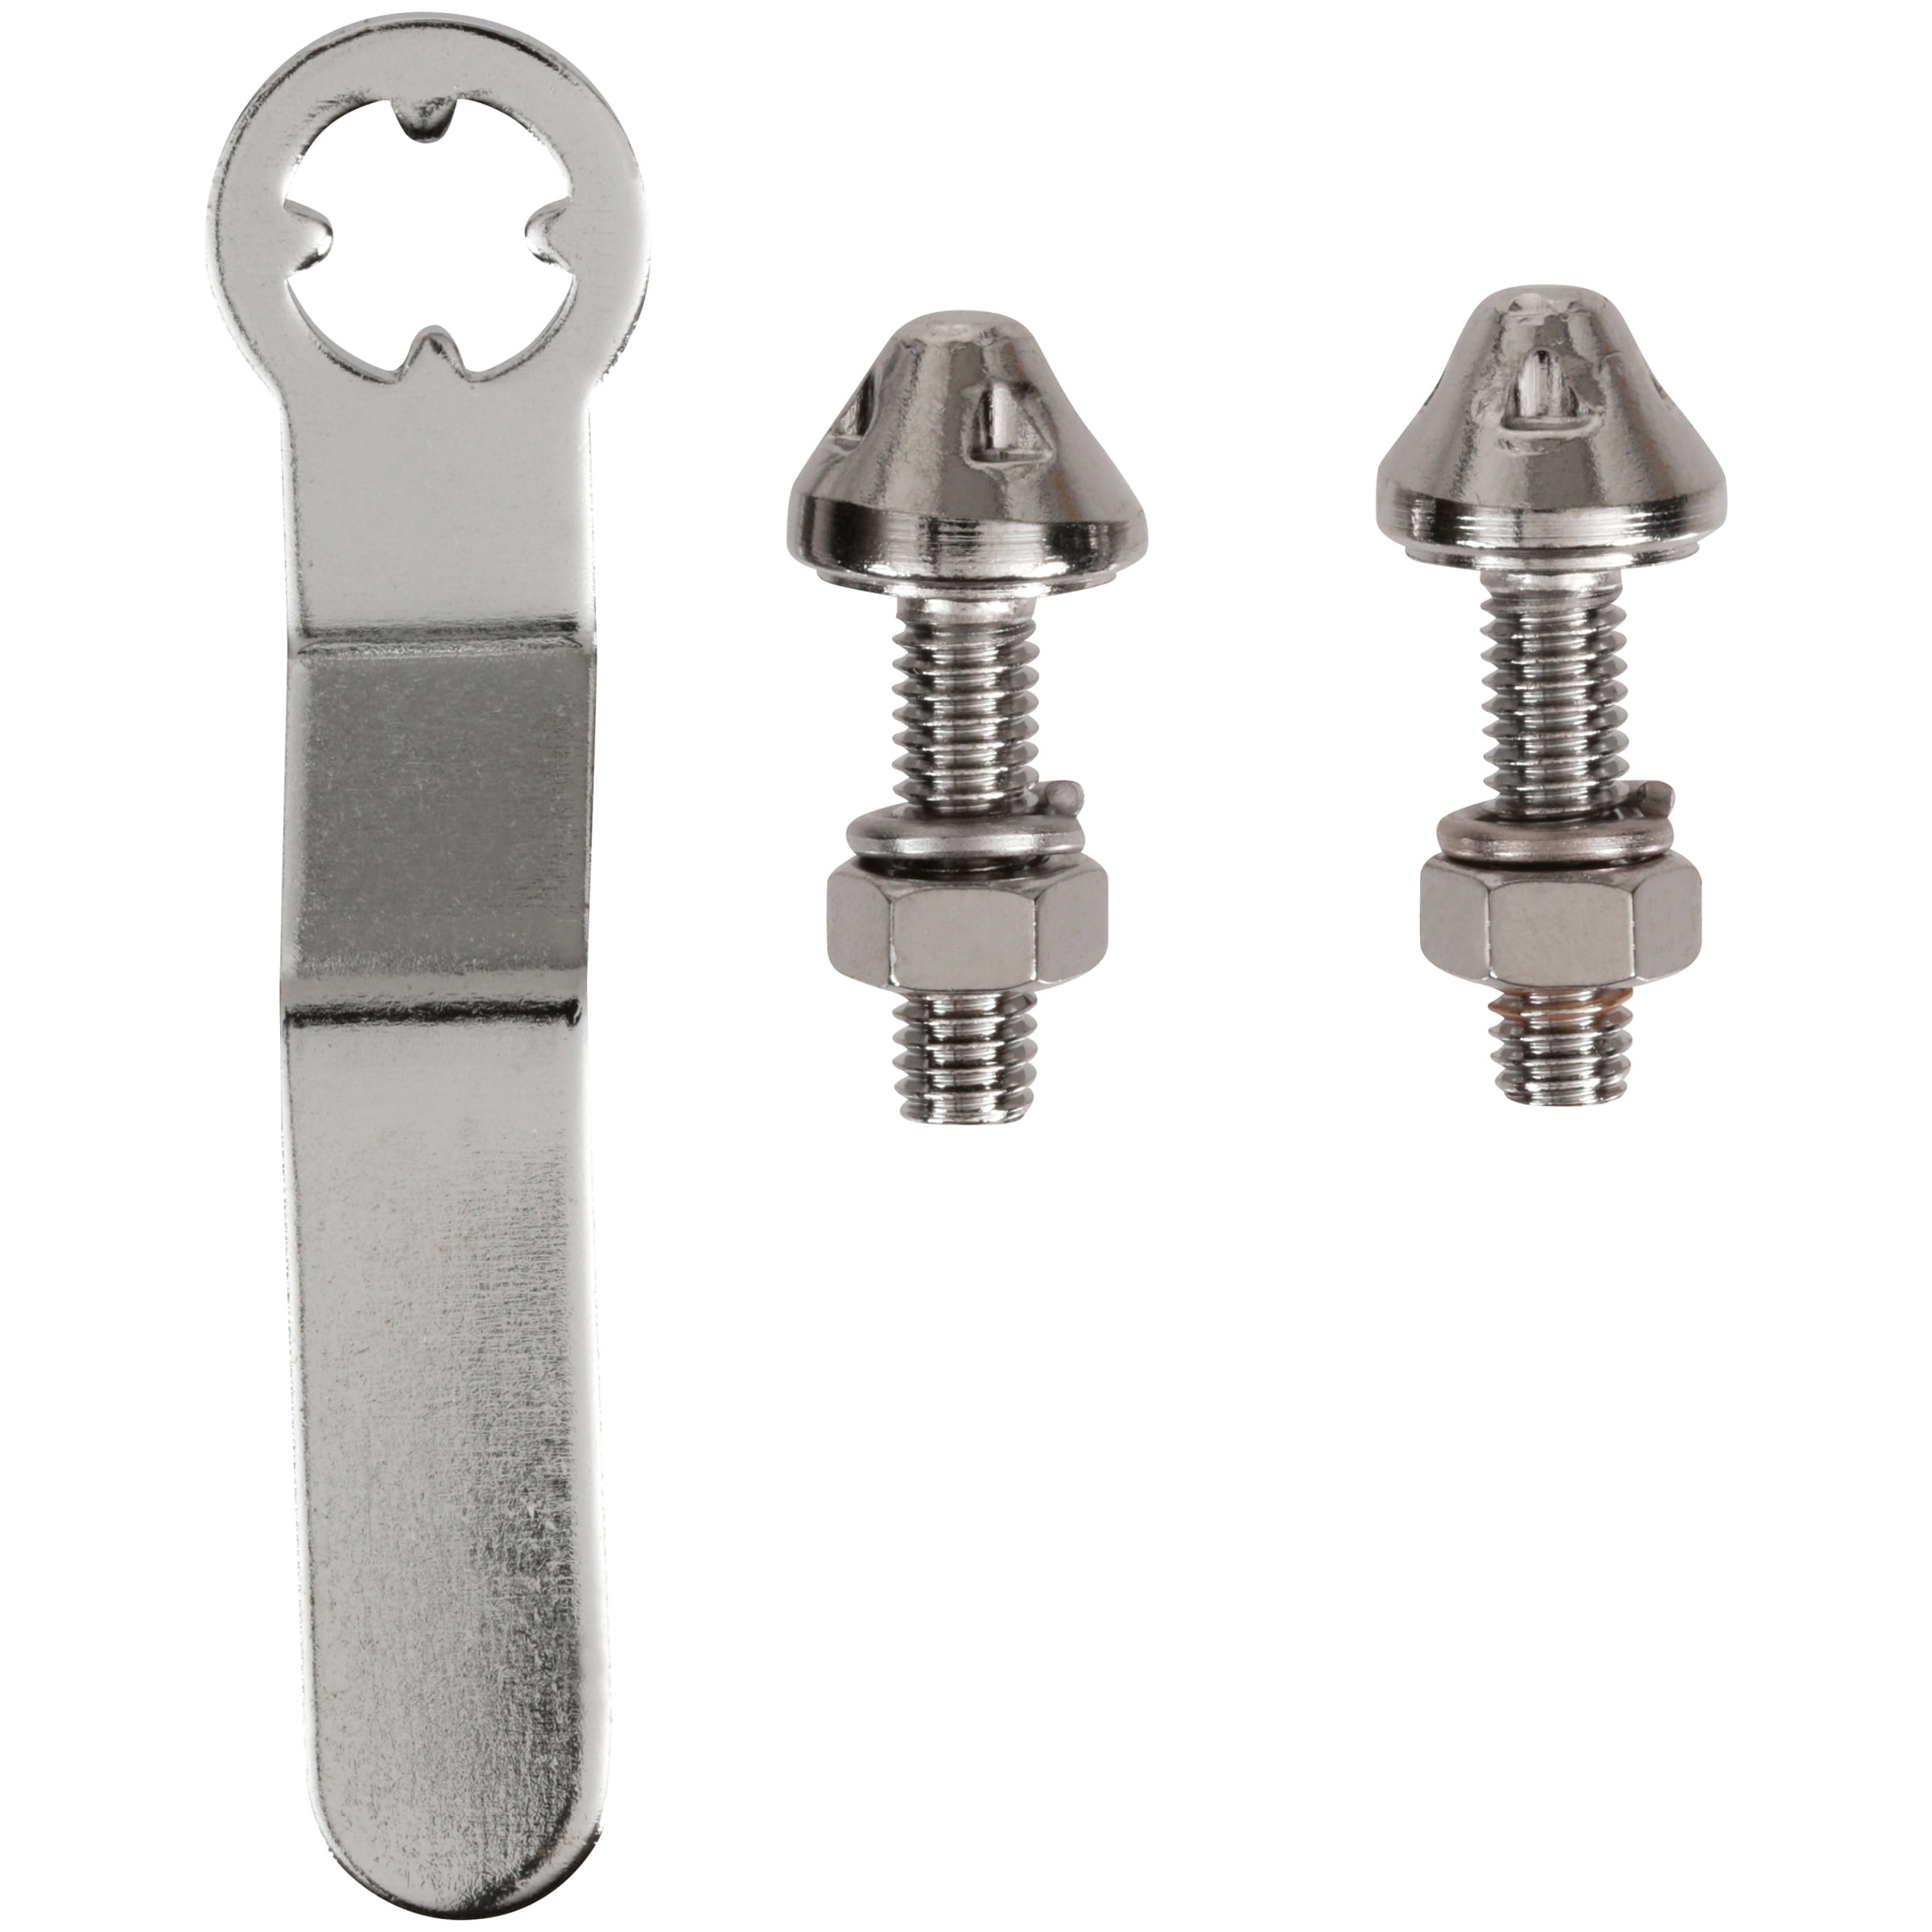 Auto Logo Chrome Metal Anti-Theft Car License Plate Bolts Frame Screws A Pack of 4 for Nissan